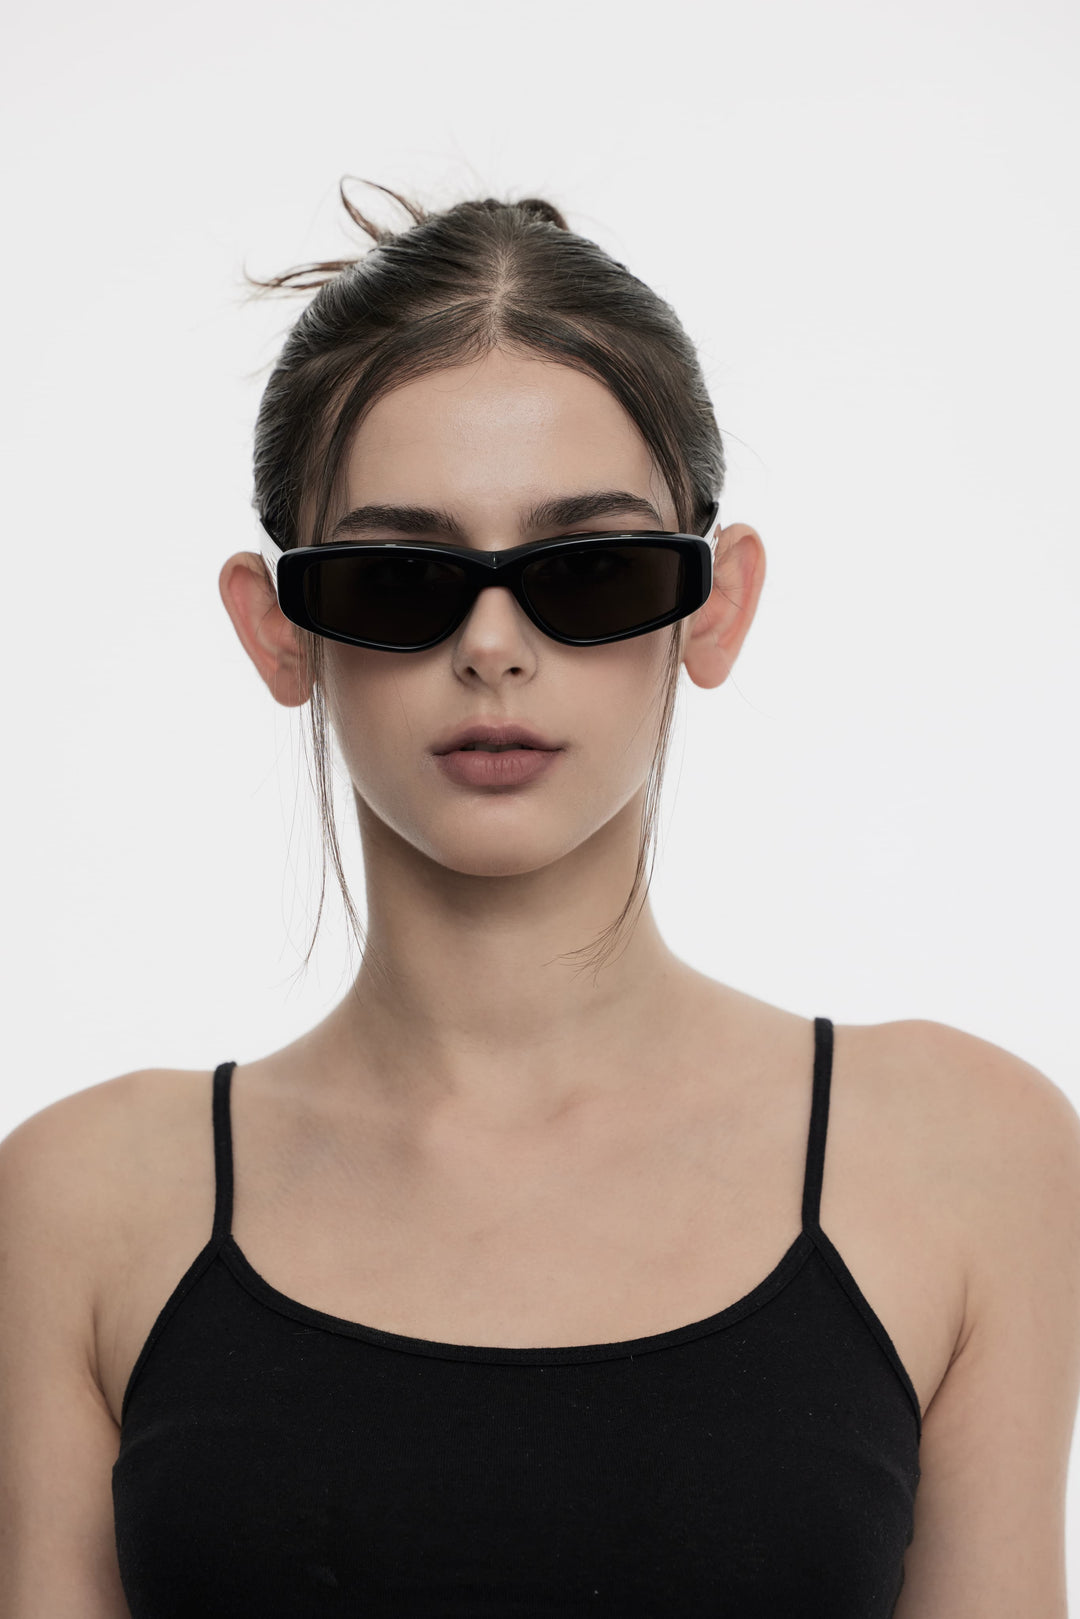 Female Model of her front face wearing Hydrus in black square stylish sunglasses from Mercury Retrograde Galaxy Collection 